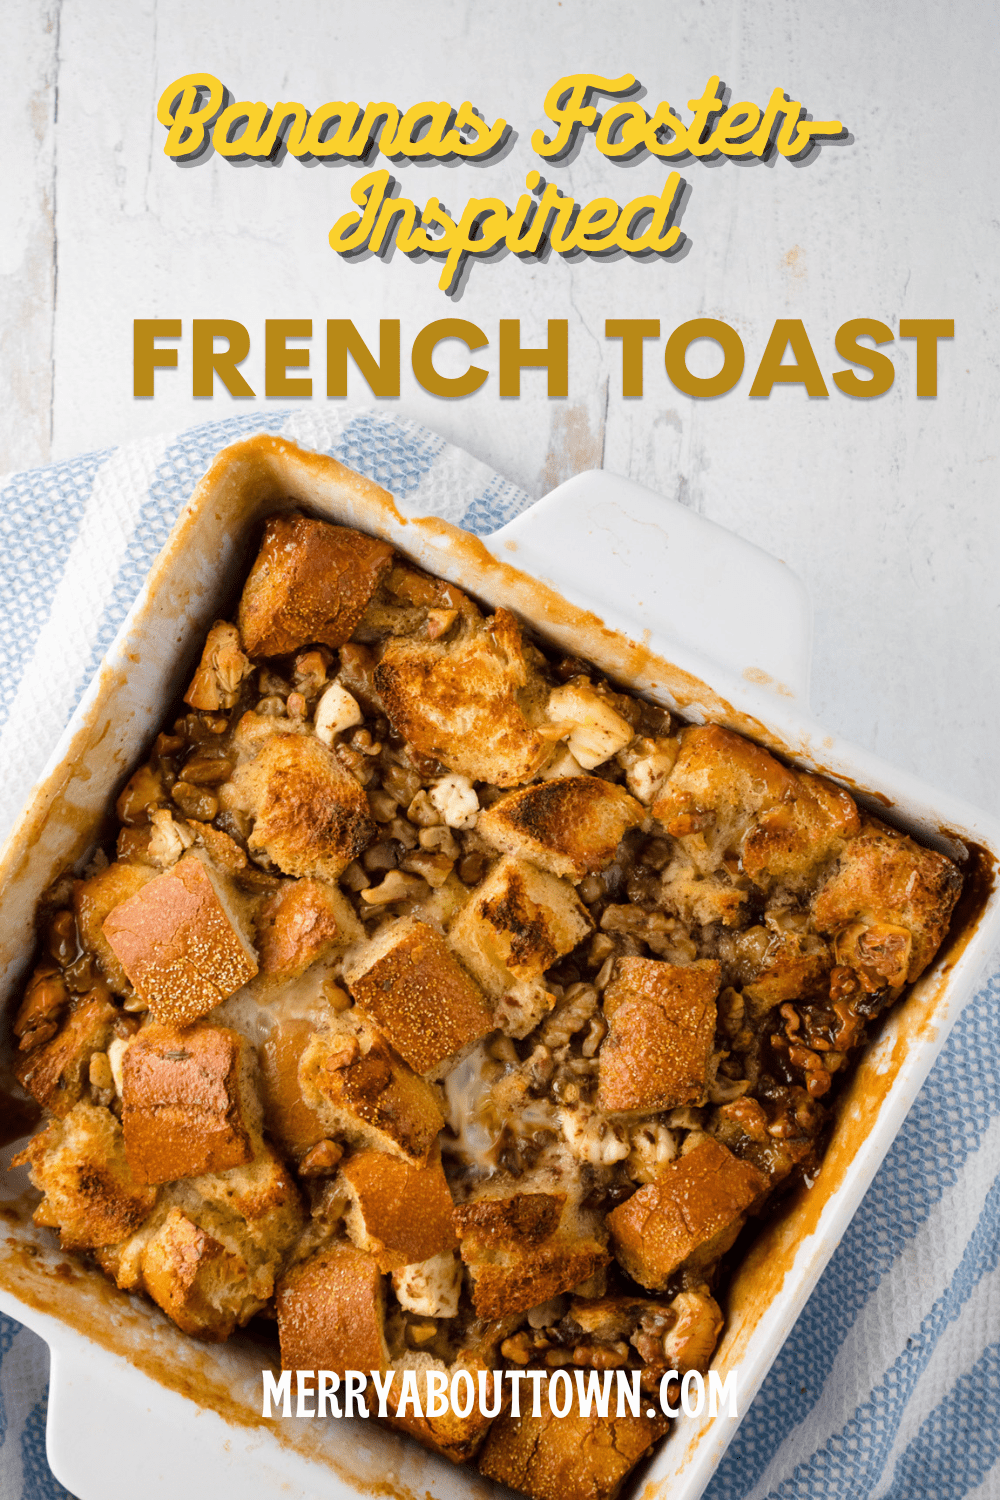 Looking to step-up your French toast game? Look no further! This French Toast Banana Recipe is inspired by the classic Bananas Foster that we all know and love. It’s sweet and full of delicious, flavorful layers!